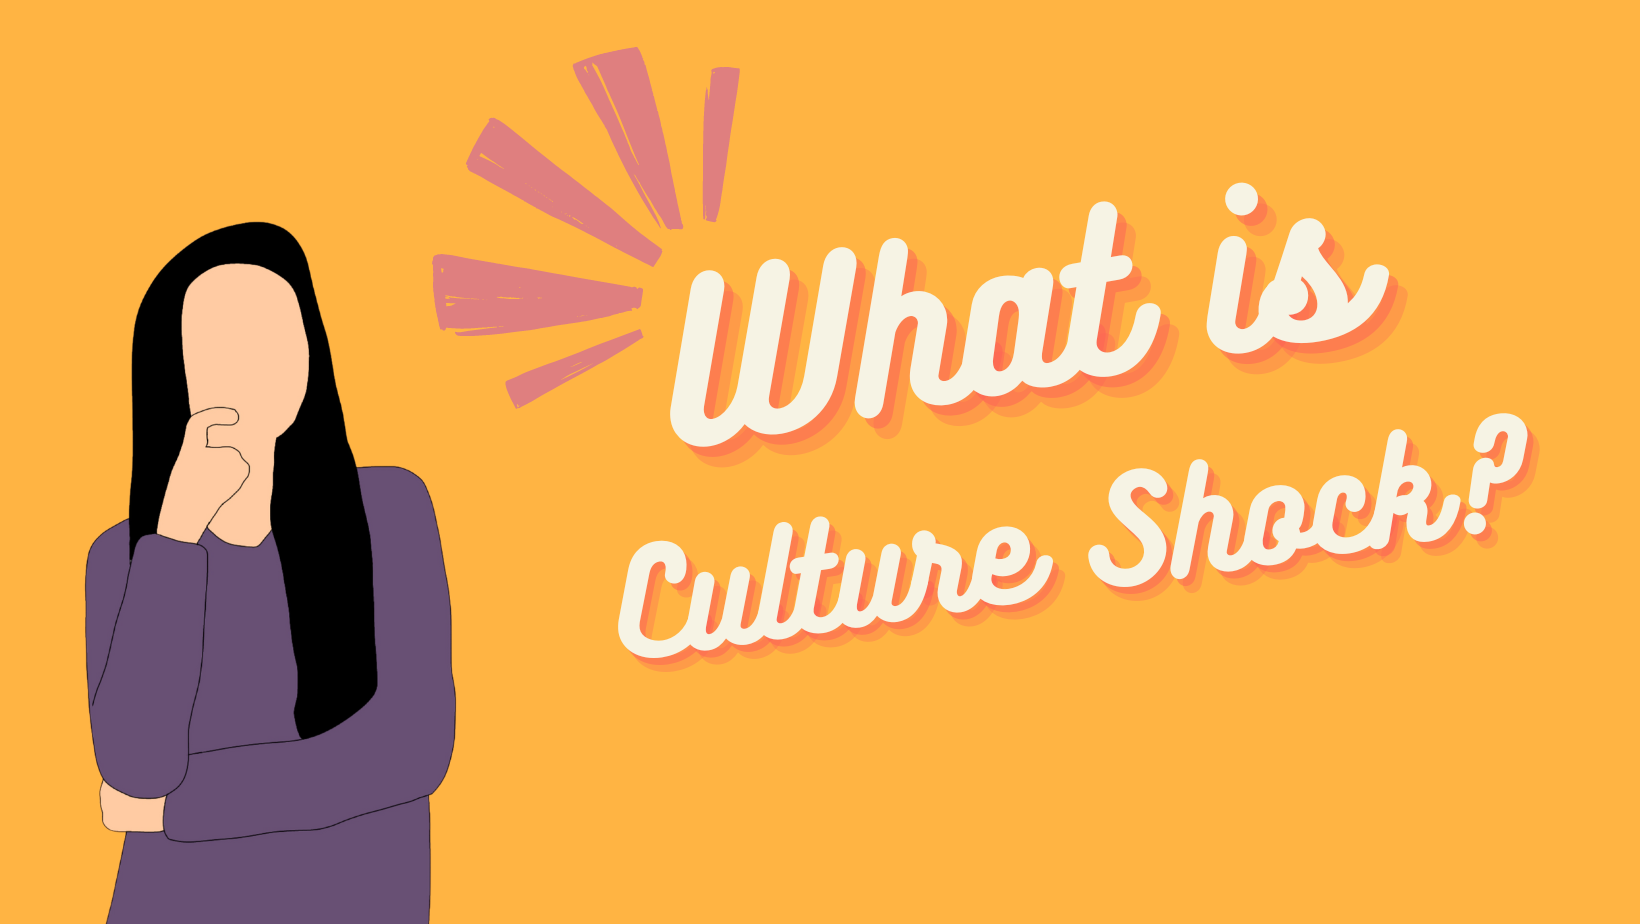 What is Culture Shock?